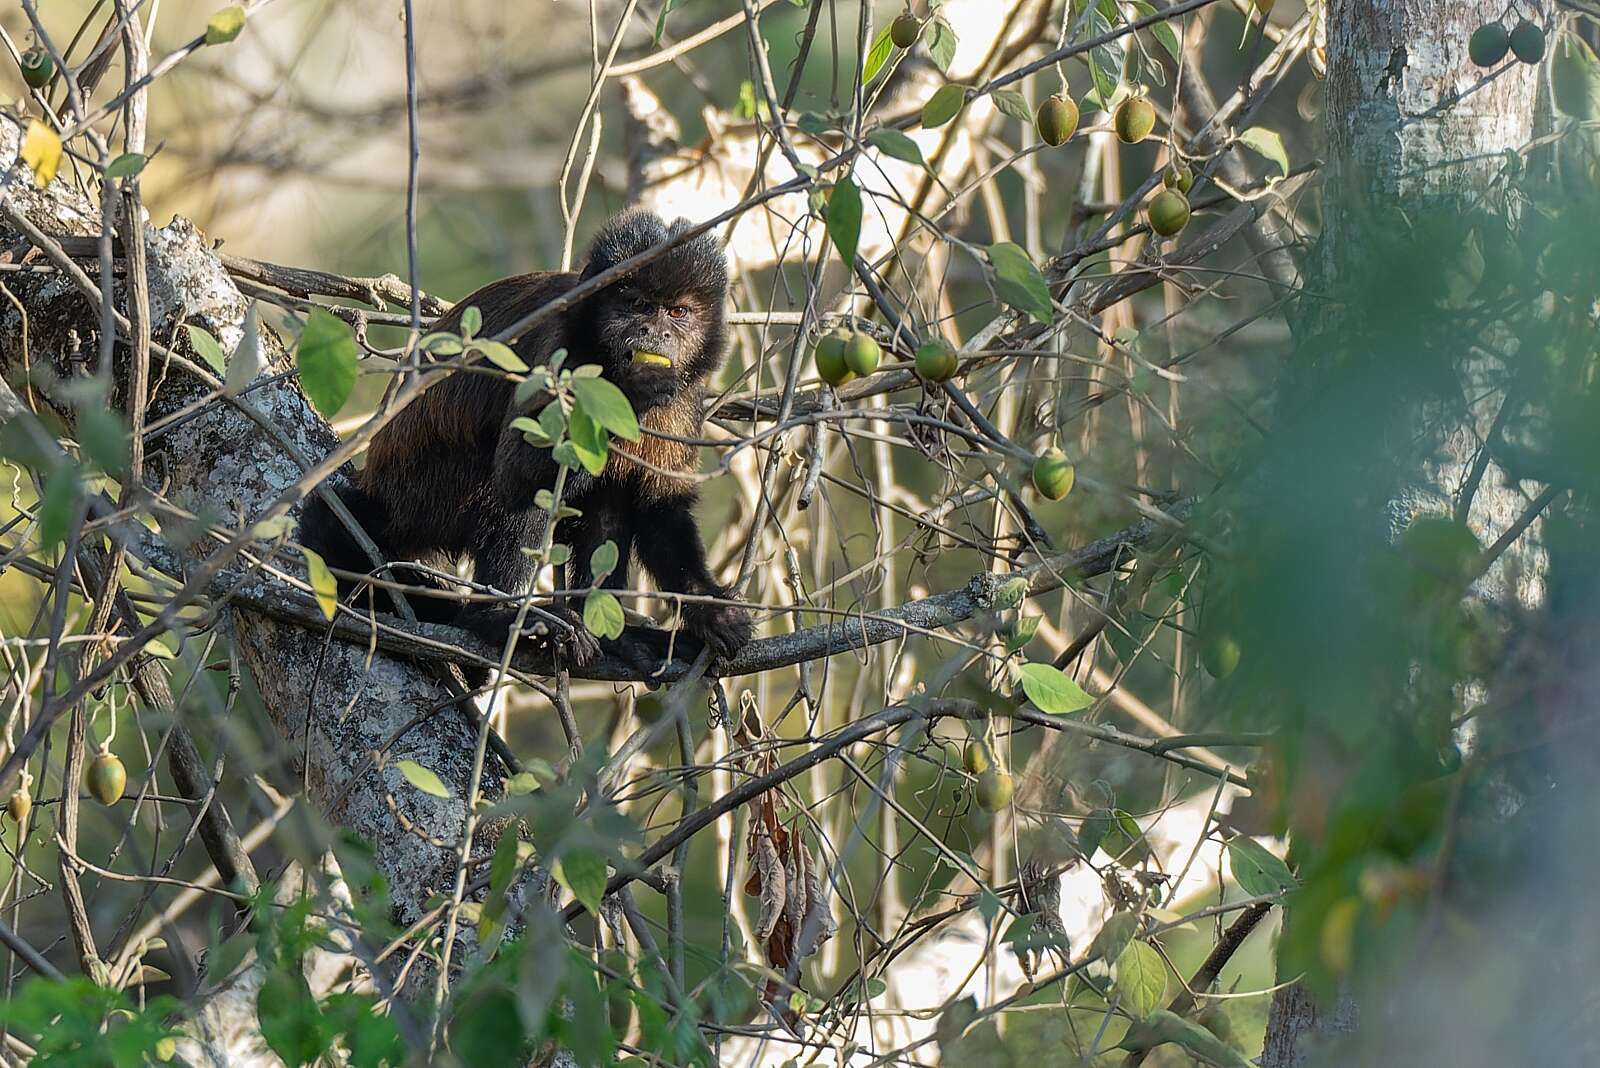 Image of Crested Capuchin